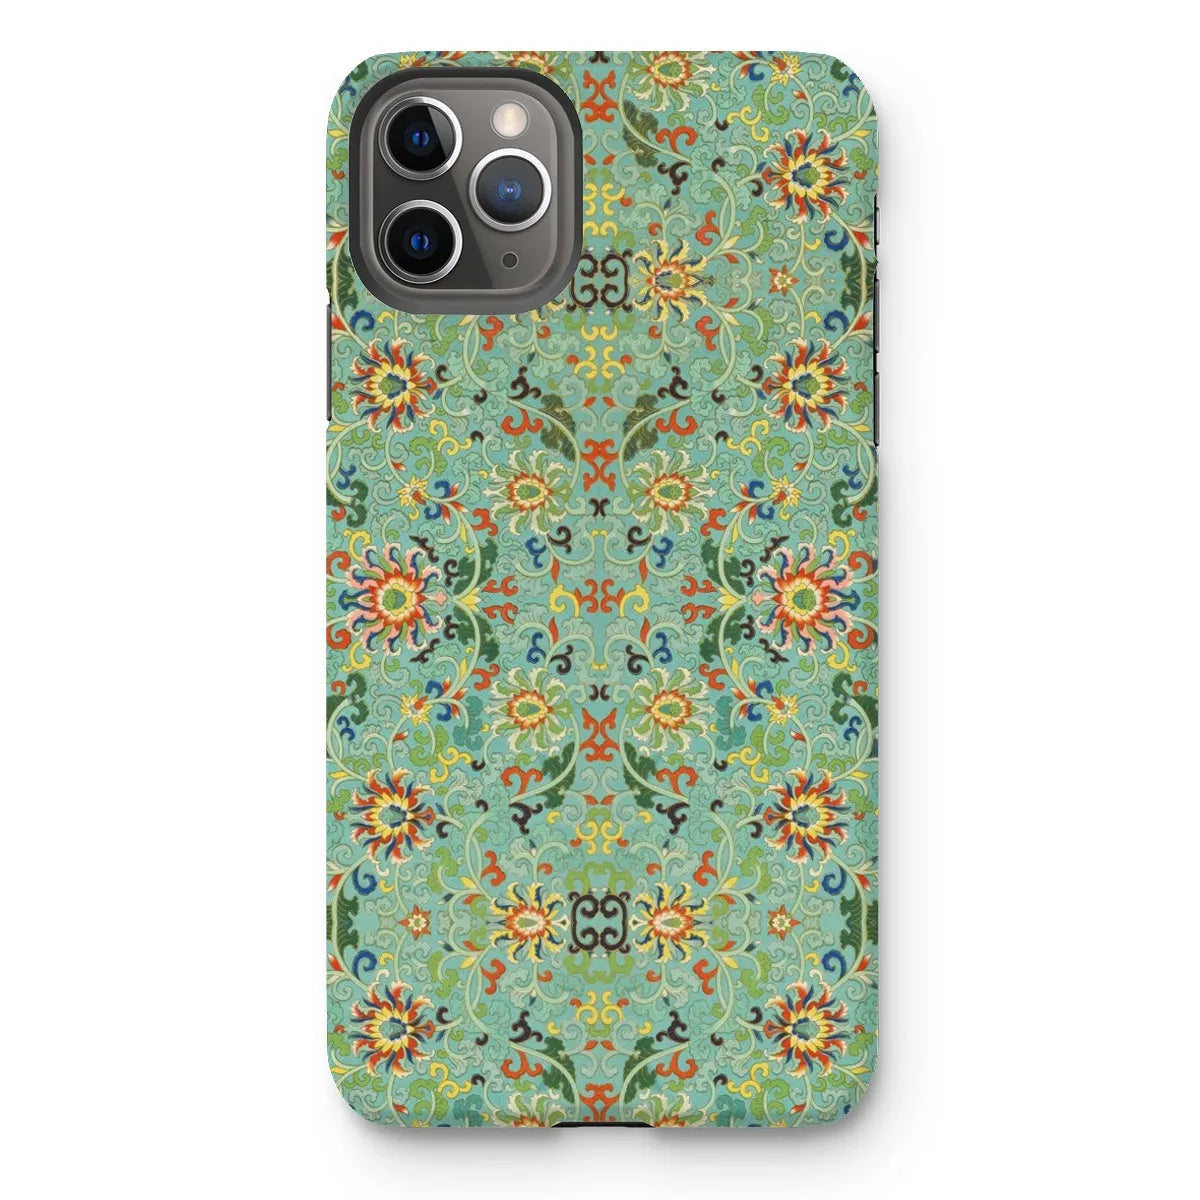 Lotus Candy - Chinese Aesthetic Pattern Art Phone Case - Iphone 11 Pro Max / Matte - Mobile Phone Cases - Aesthetic Art